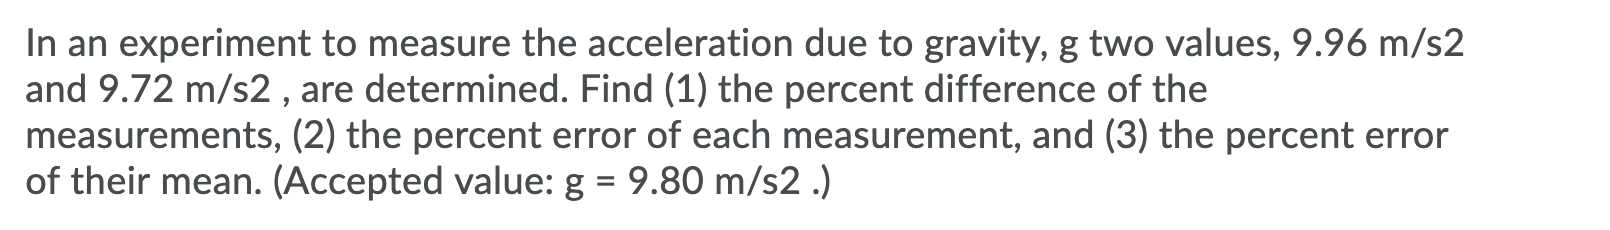 In an experiment to measure the acceleration due to gravity, g two values, 9.96 m/s2
and 9.72 m/s2 , are determined. Find (1) the percent difference of the
measurements, (2) the percent error of each measurement, and (3) the percent error
of their mean. (Accepted value: g = 9.80 m/s2 .)
